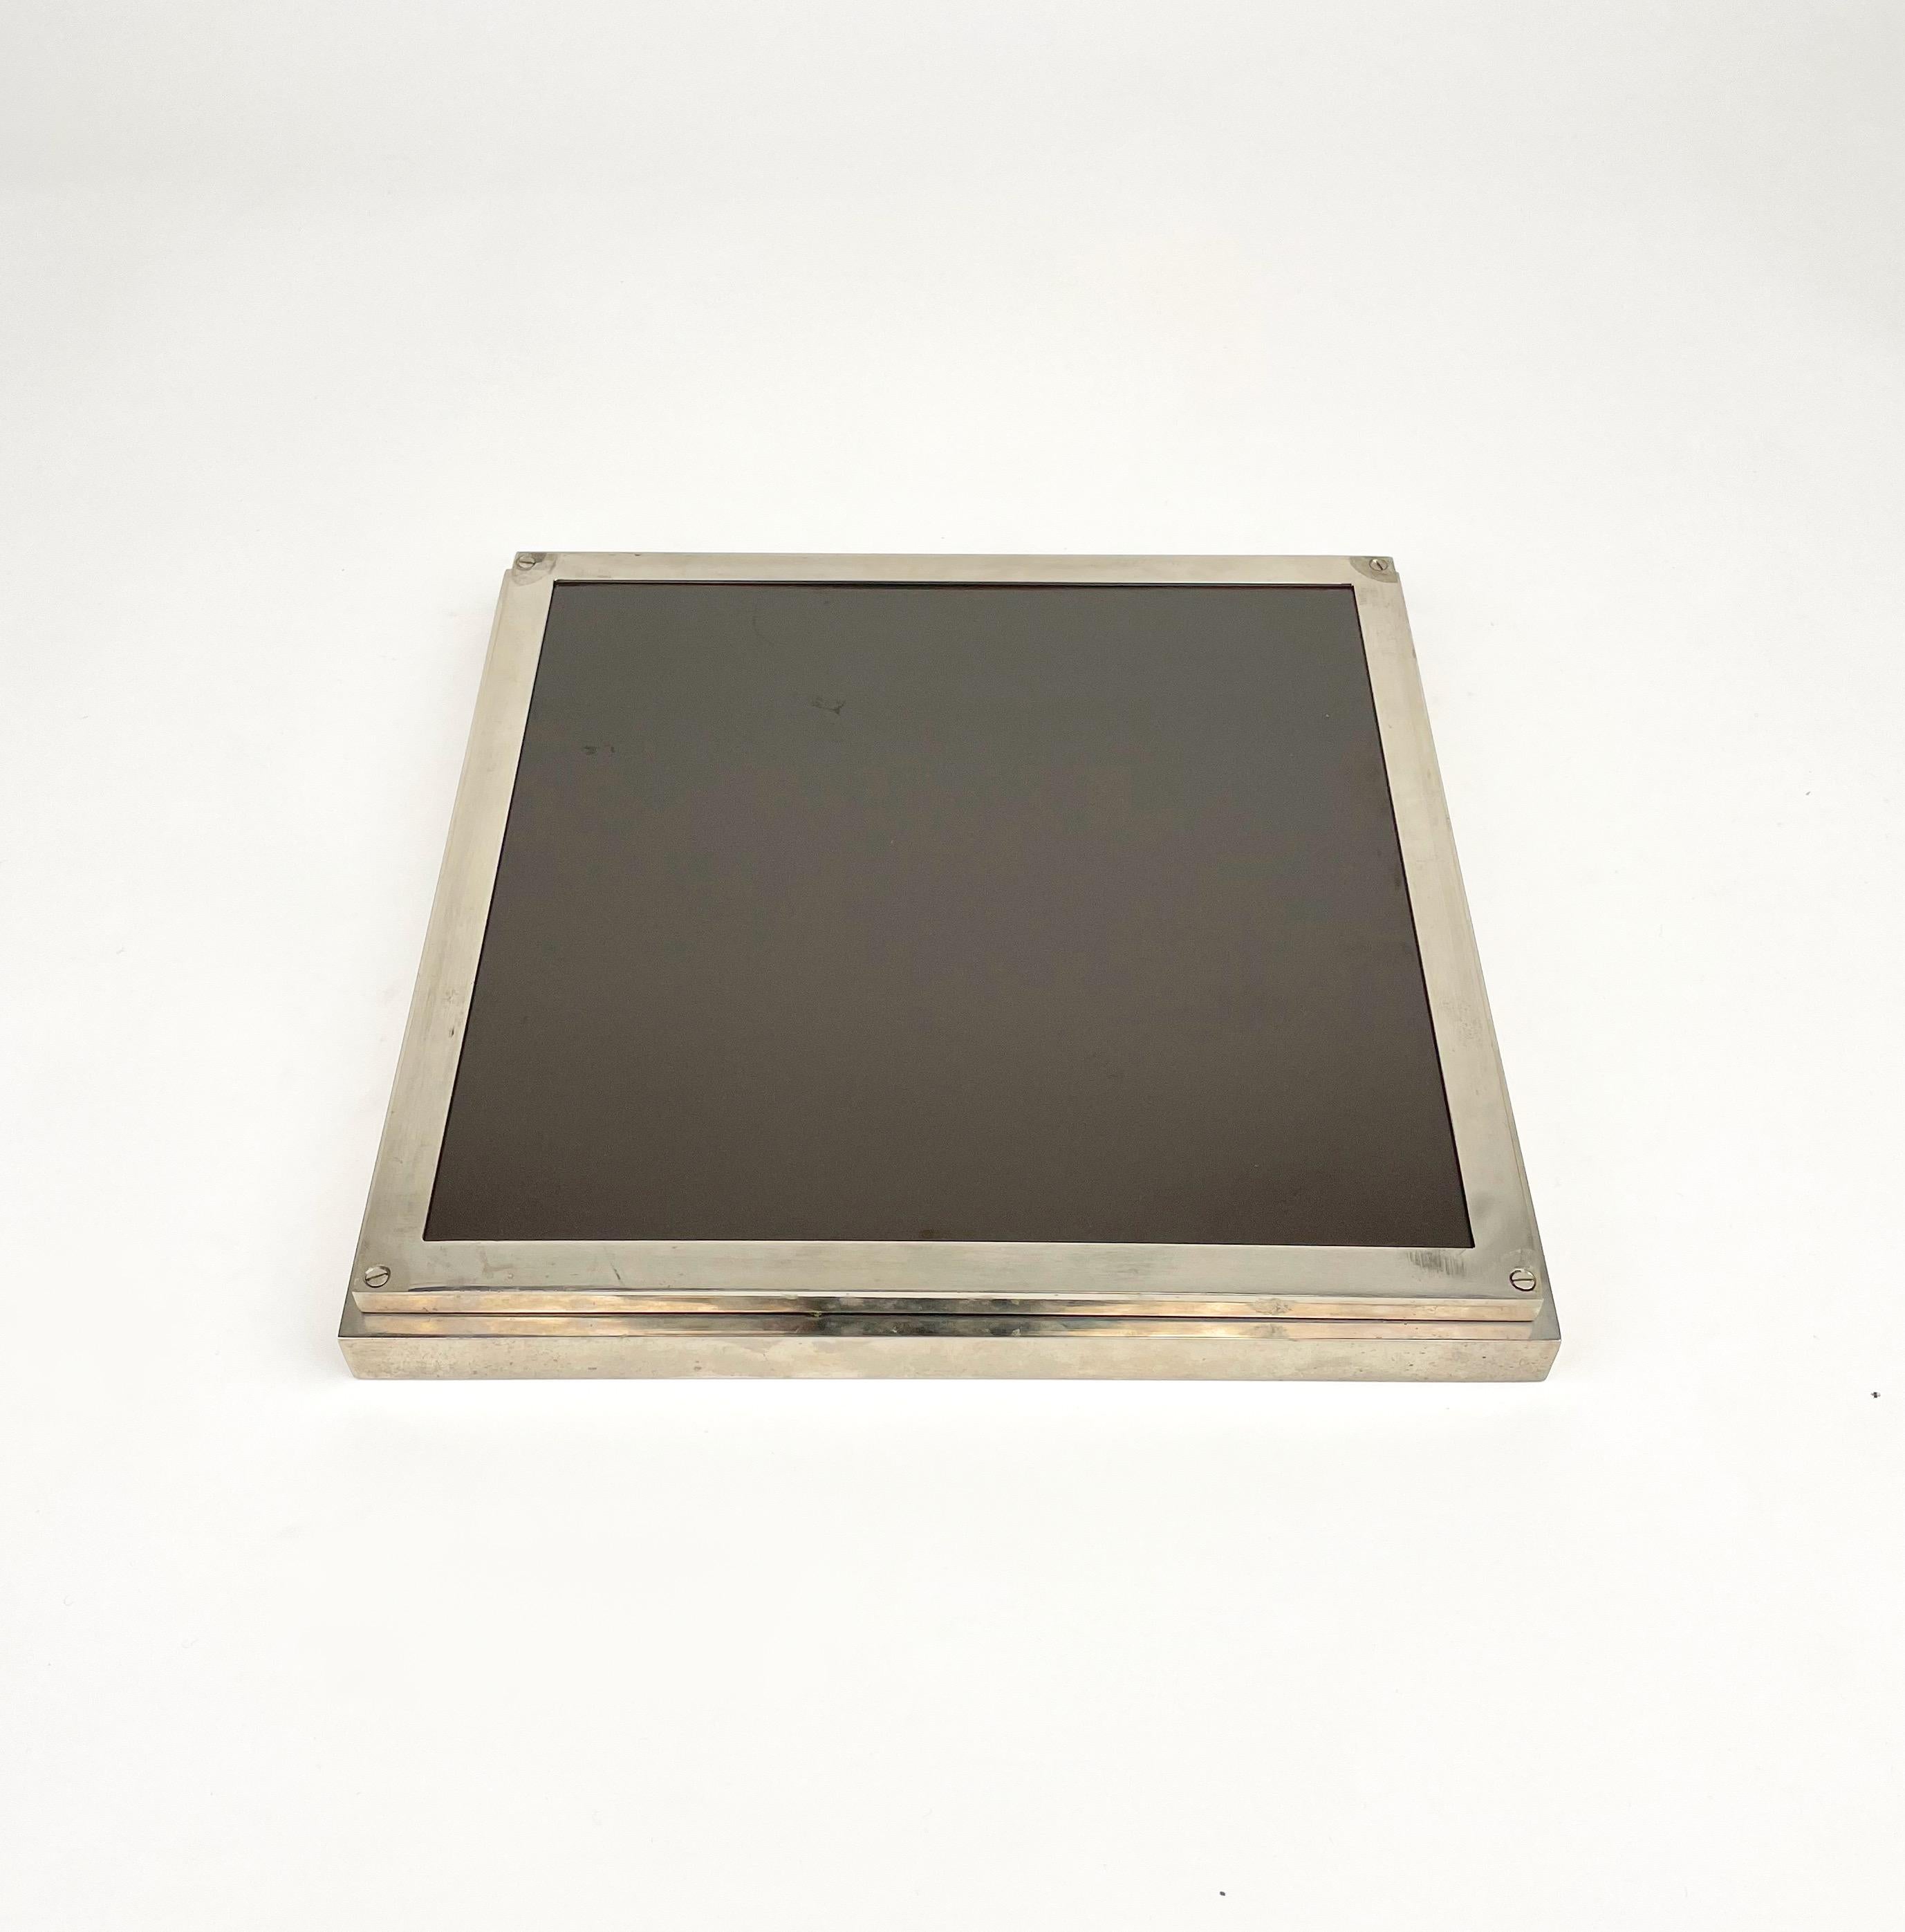 Chrome, Wood and Glass Squared Pocket Emptier Centerpiece, Italy, 1970s For Sale 3